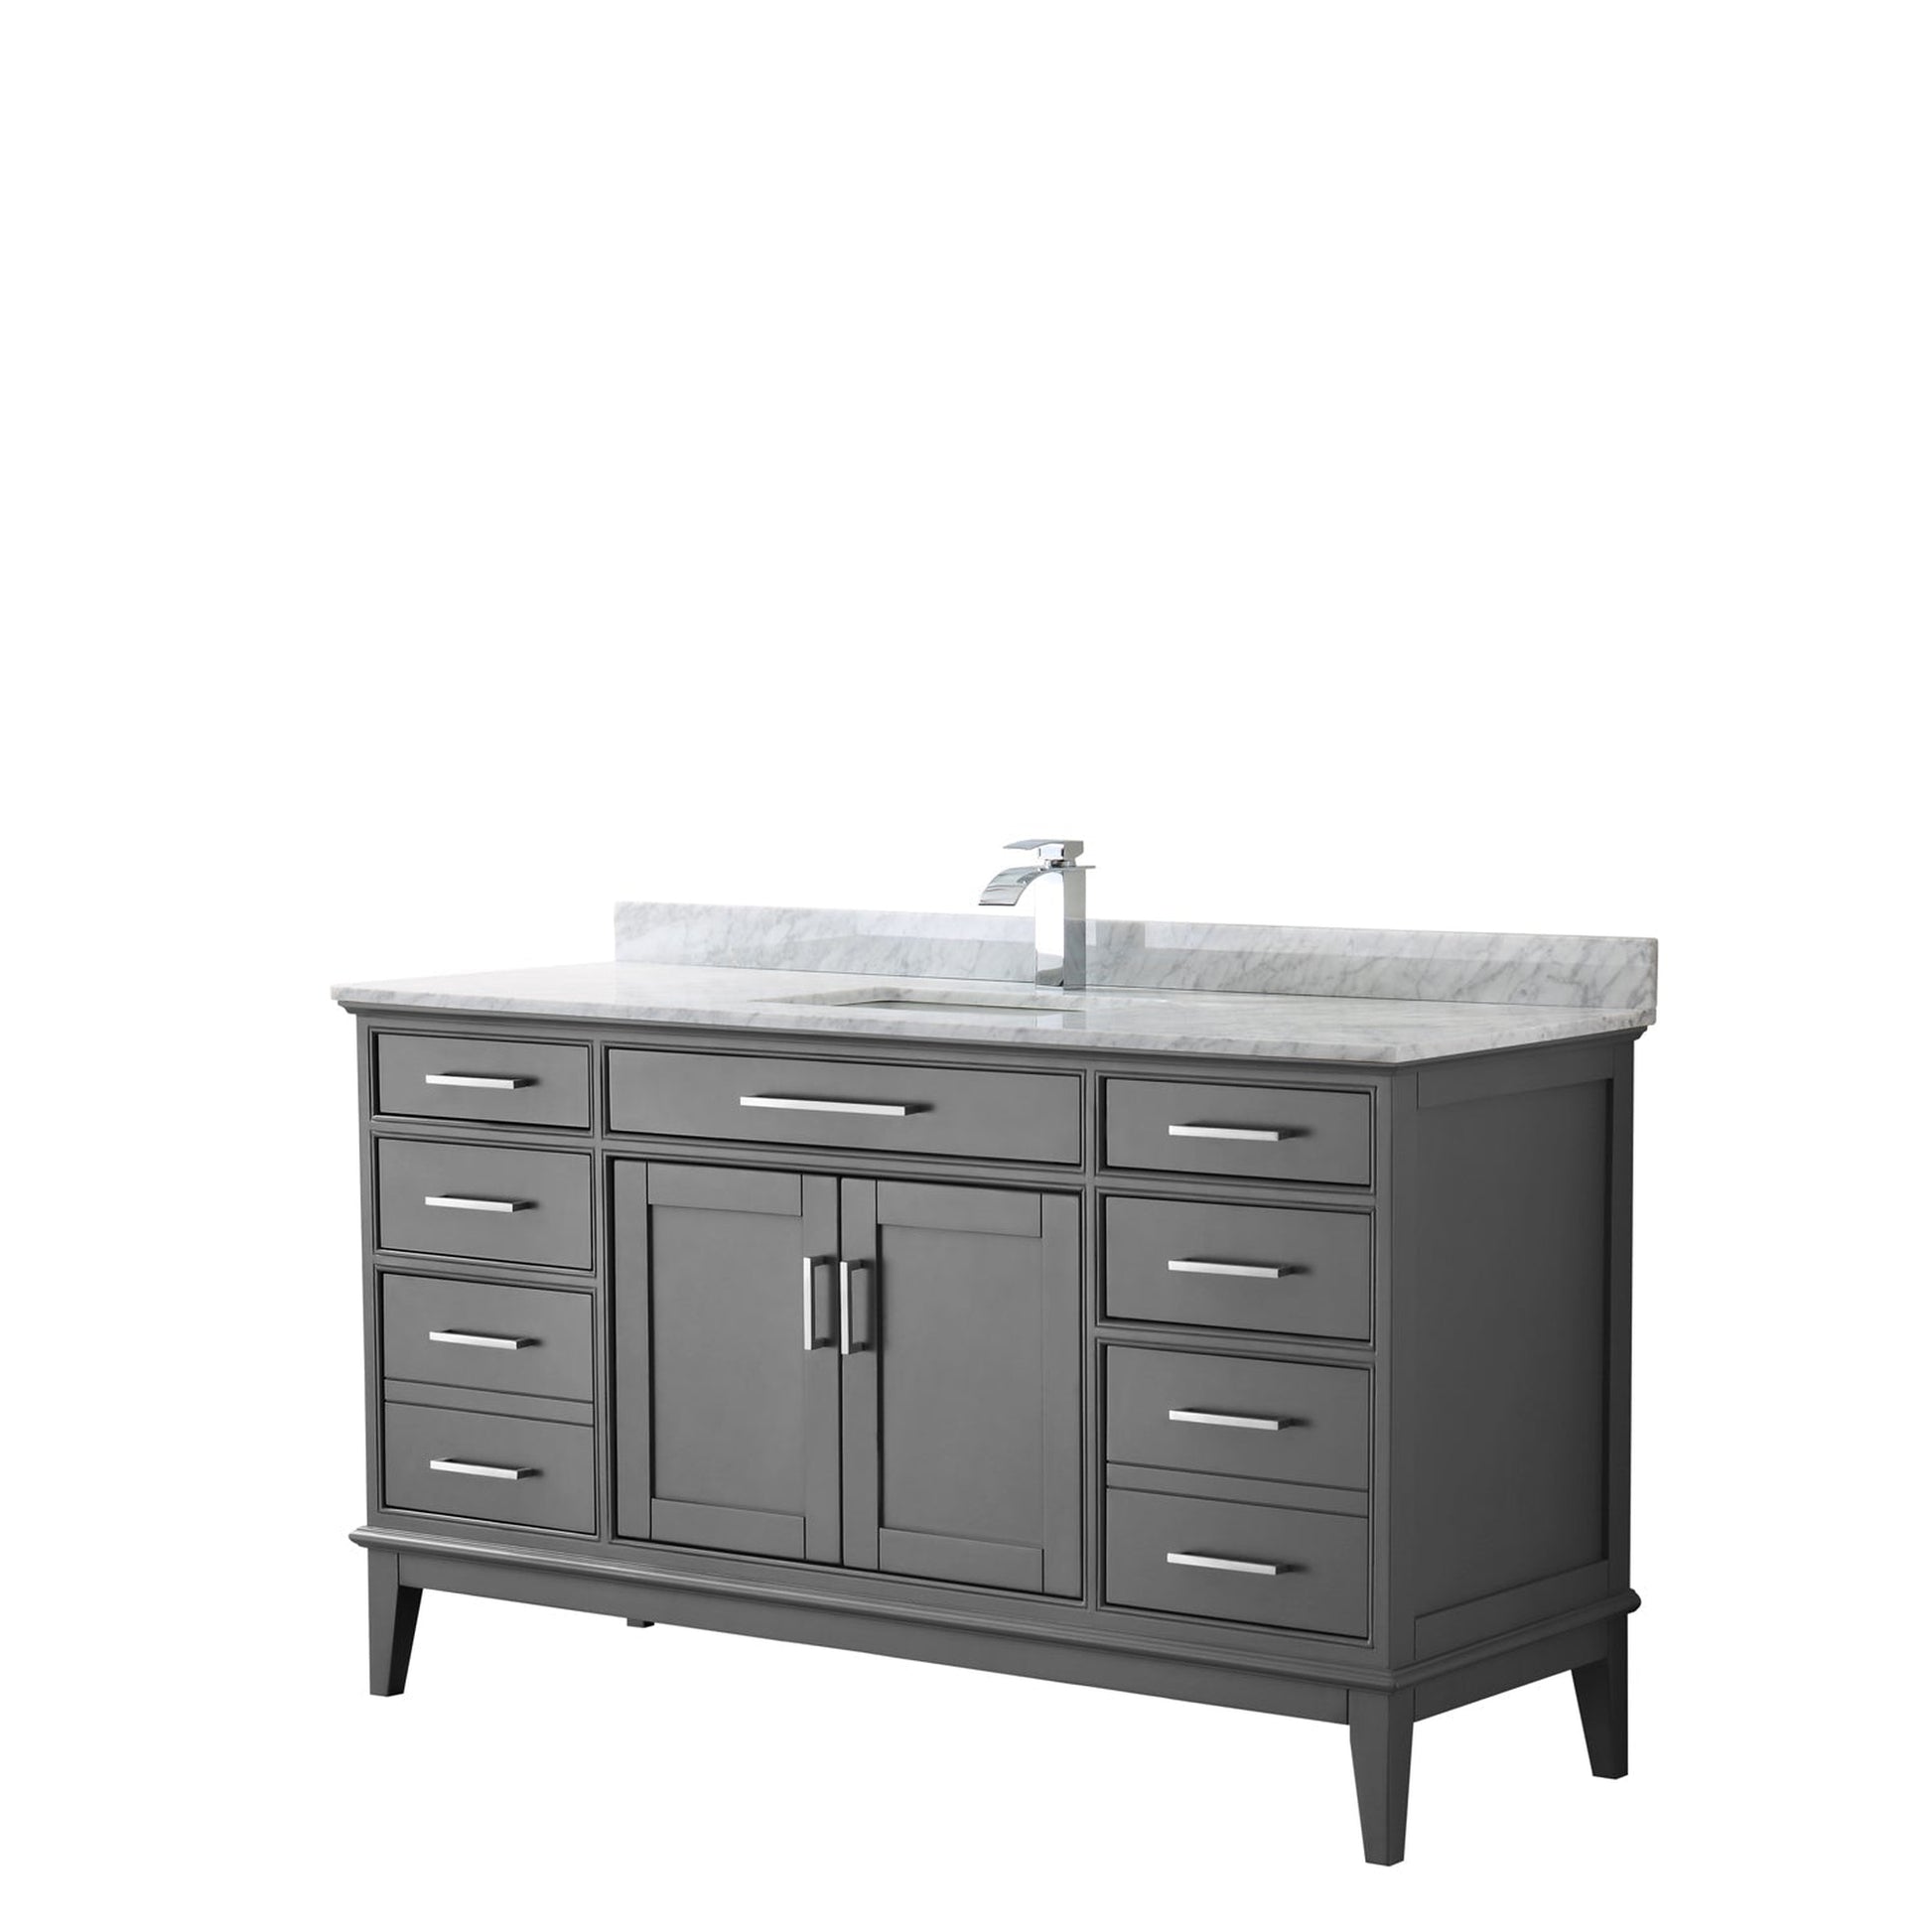 Wyndham Collection Margate 60" Single Bathroom Dark Gray Vanity With White Carrara Marble Countertop And Undermount Square Sink